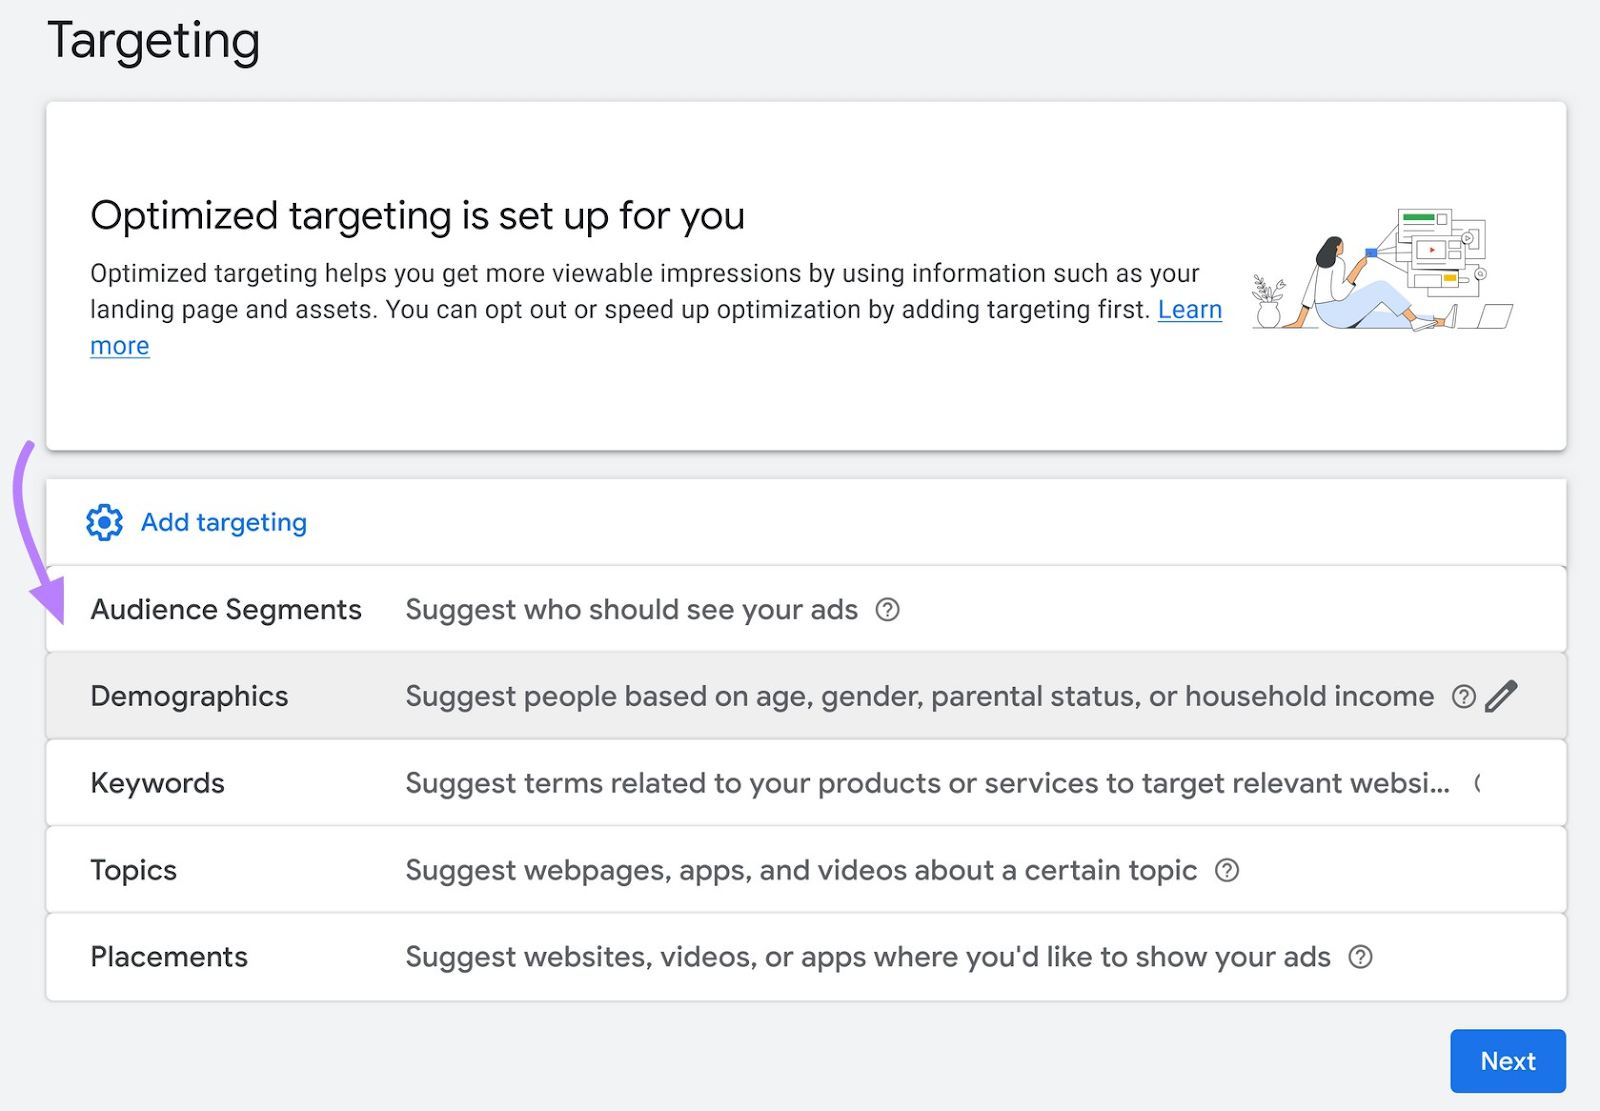 "Targeting" section in Google